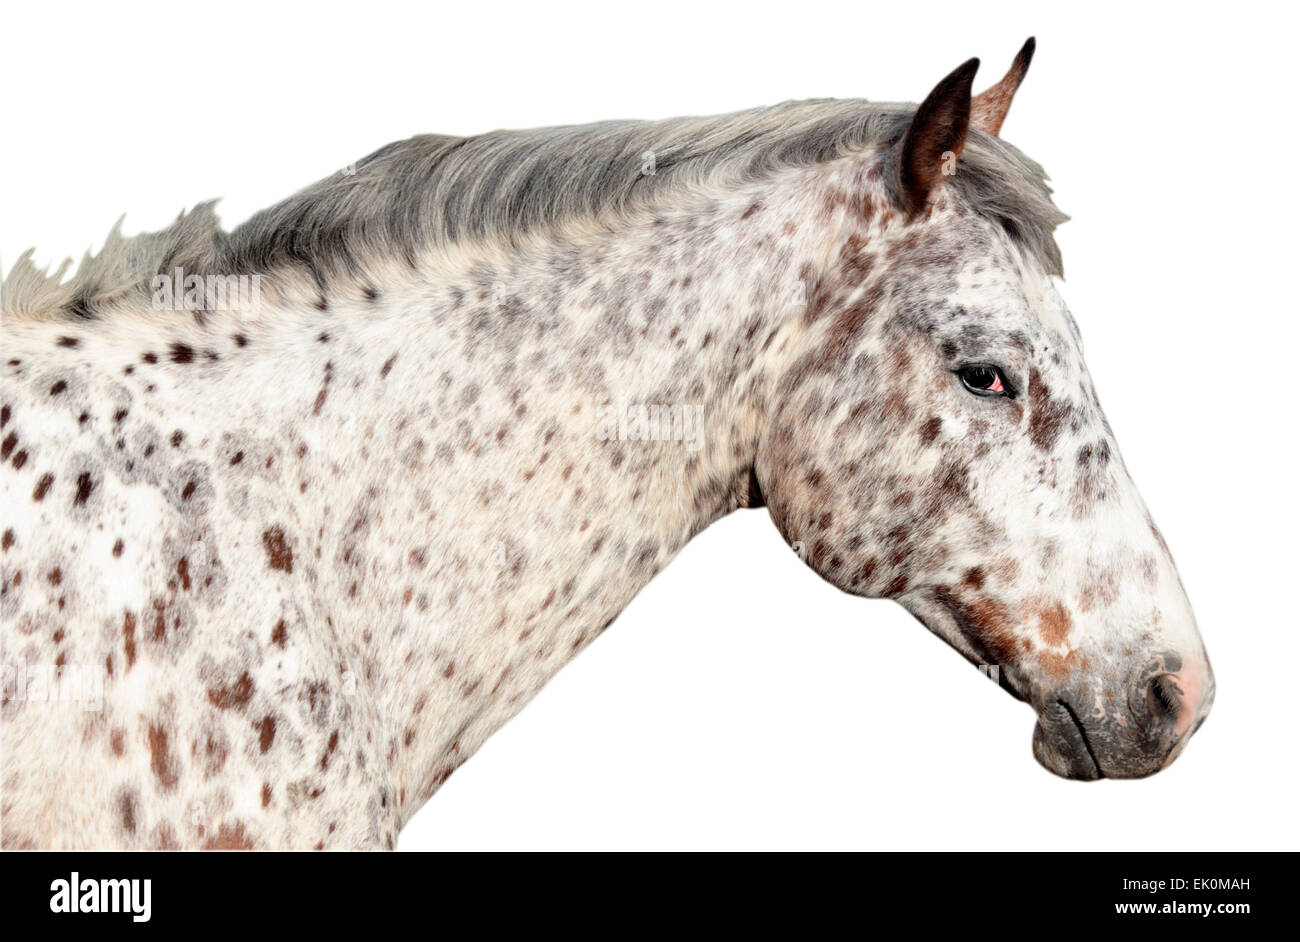 nobody, no one, no-one, nature, natural, biology, biological, animal themes, animal, animals, fauna, one animal, appaloosa horse, horse, side view, head, animal portrait, mammal, plain background, white background Stock Photo